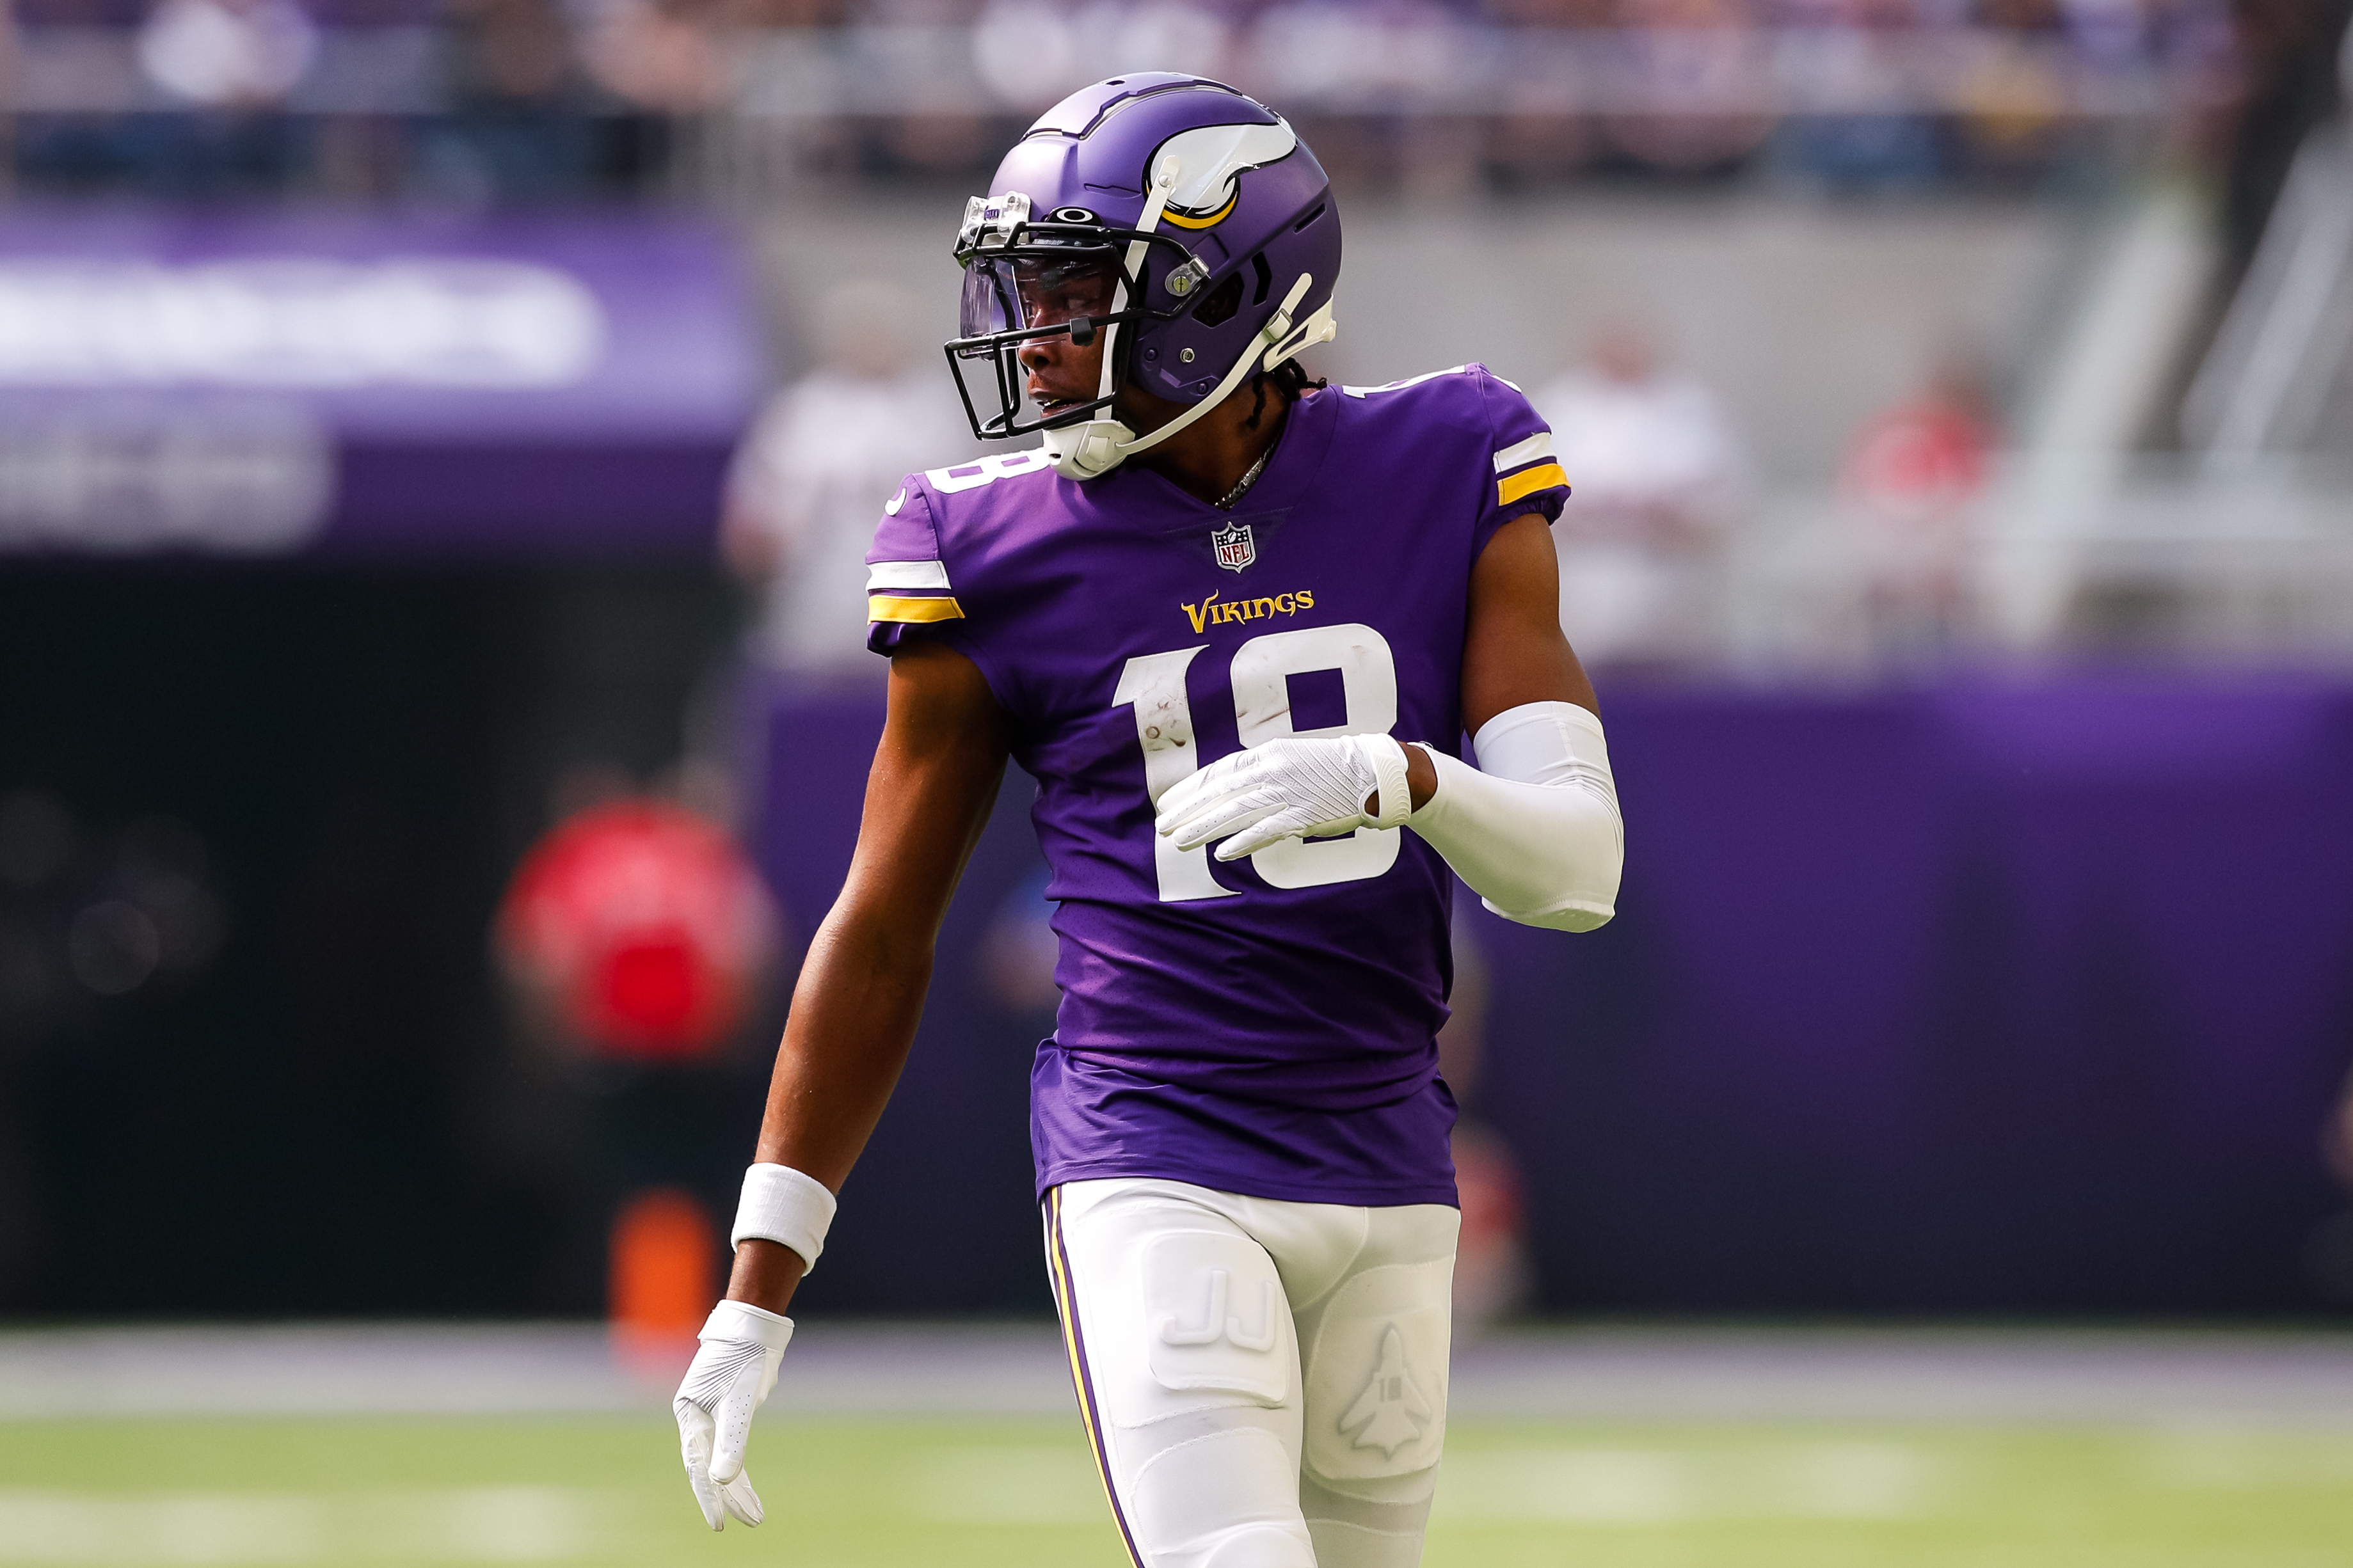 MINNEAPOLIS, MN - SEPTEMBER 11: Justin Jefferson #18 of the Minnesota Vikings looks on against the Green Bay Packers in the first quarter of the game at U.S. Bank Stadium on September 11, 2022 in Minneapolis, Minnesota. The Vikings defeated the Packers 23-7.